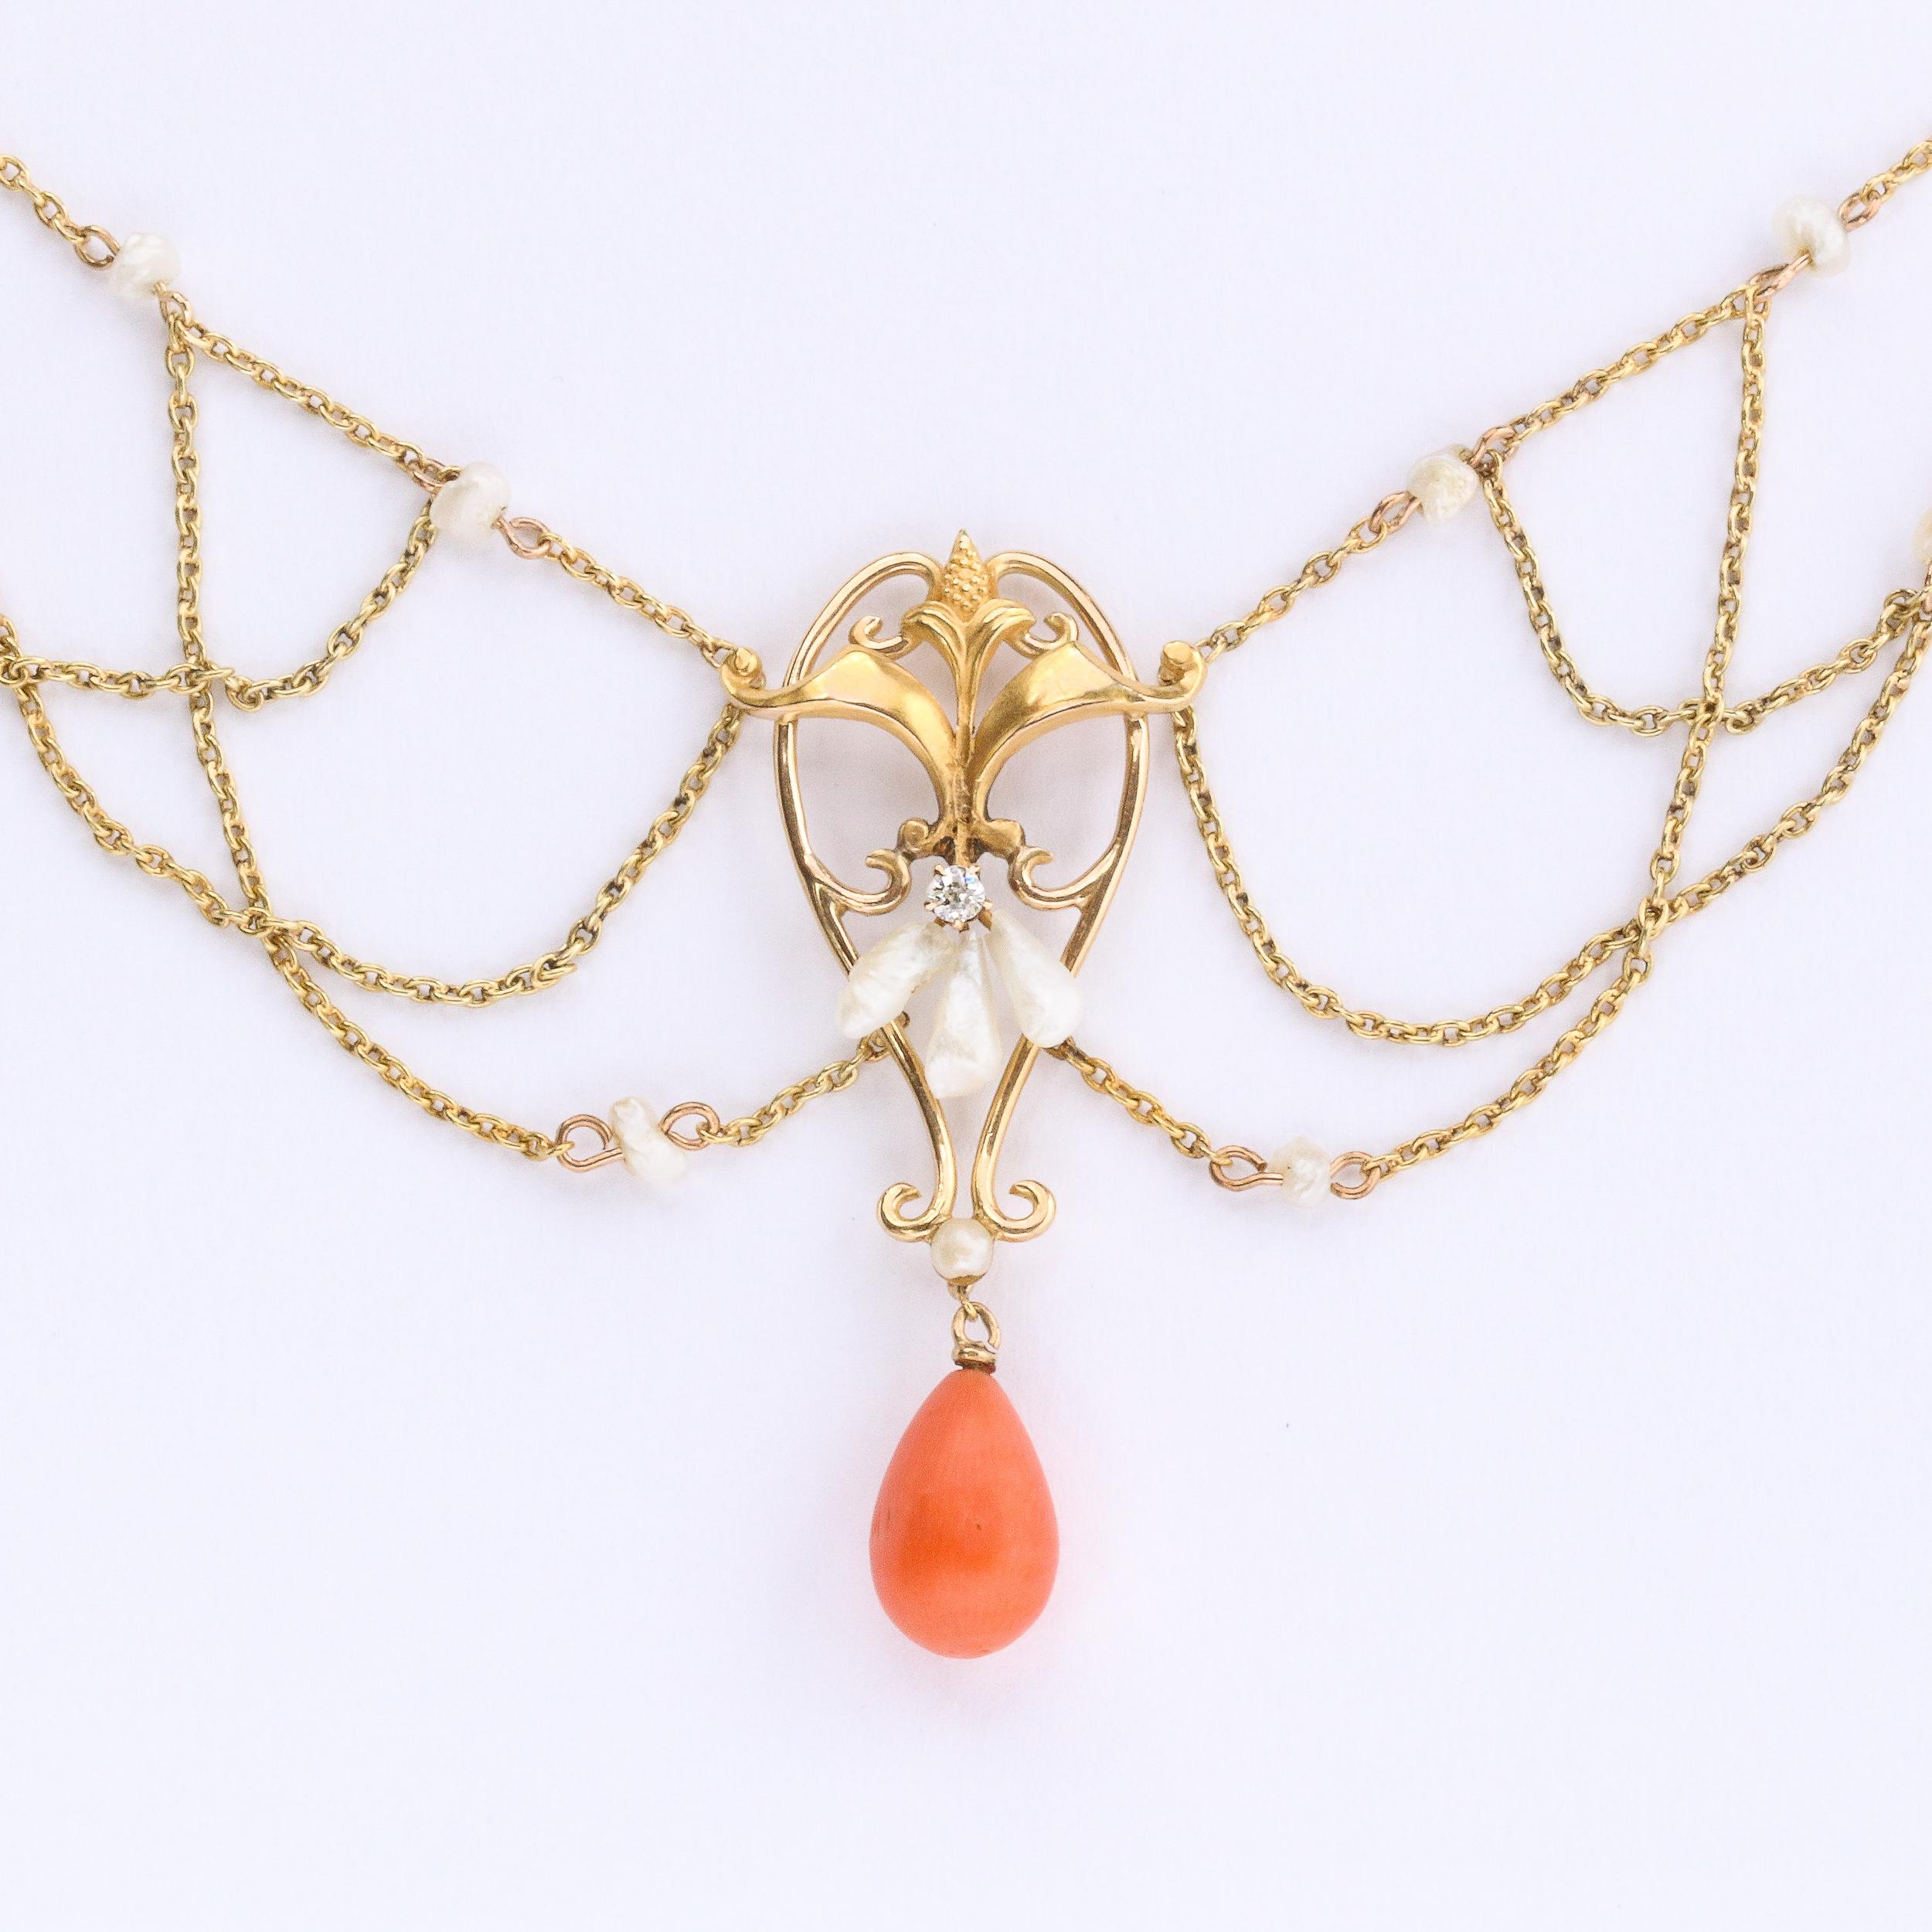 Old European Cut Art Nouveau 14k Gold, Pearl, Coral and Diamond Swag Necklace For Sale